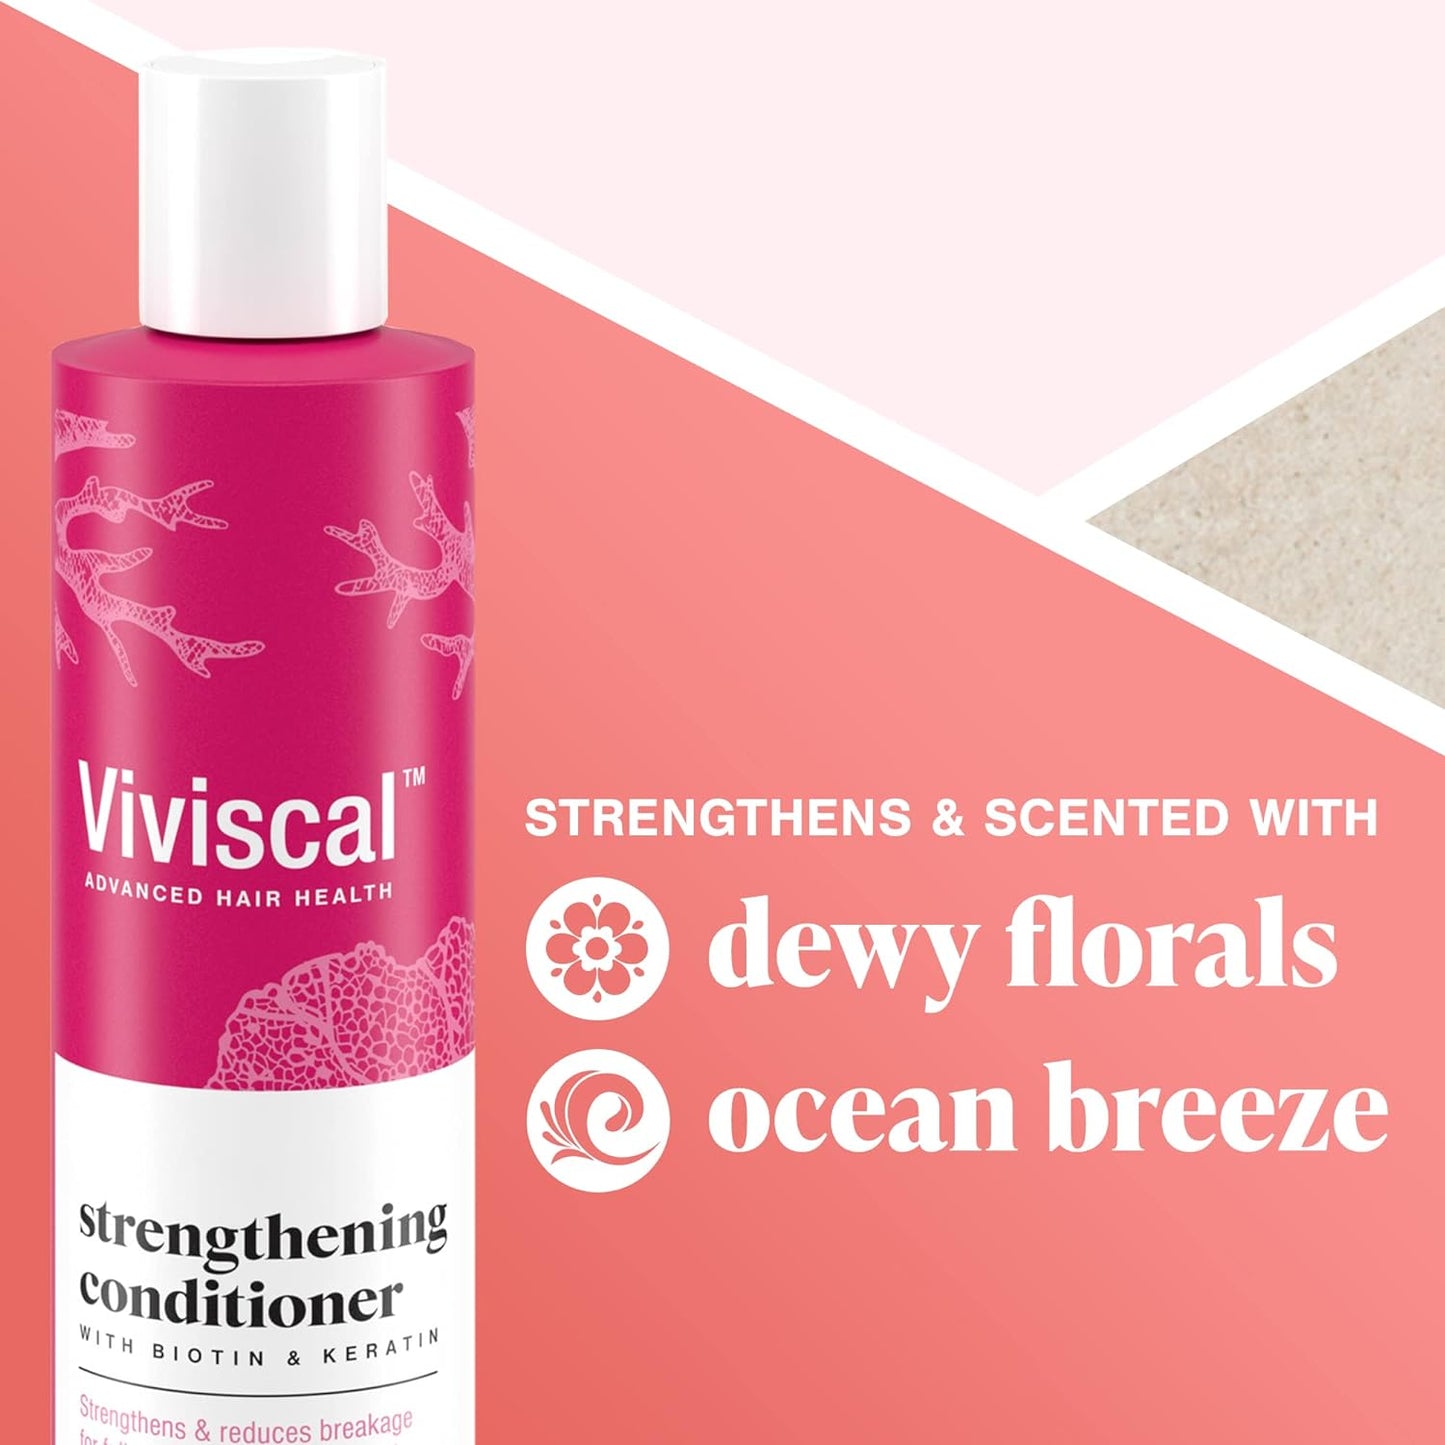 Viviscal strengthening conditioner cleanses and scented with dewy florals and ocean breeze